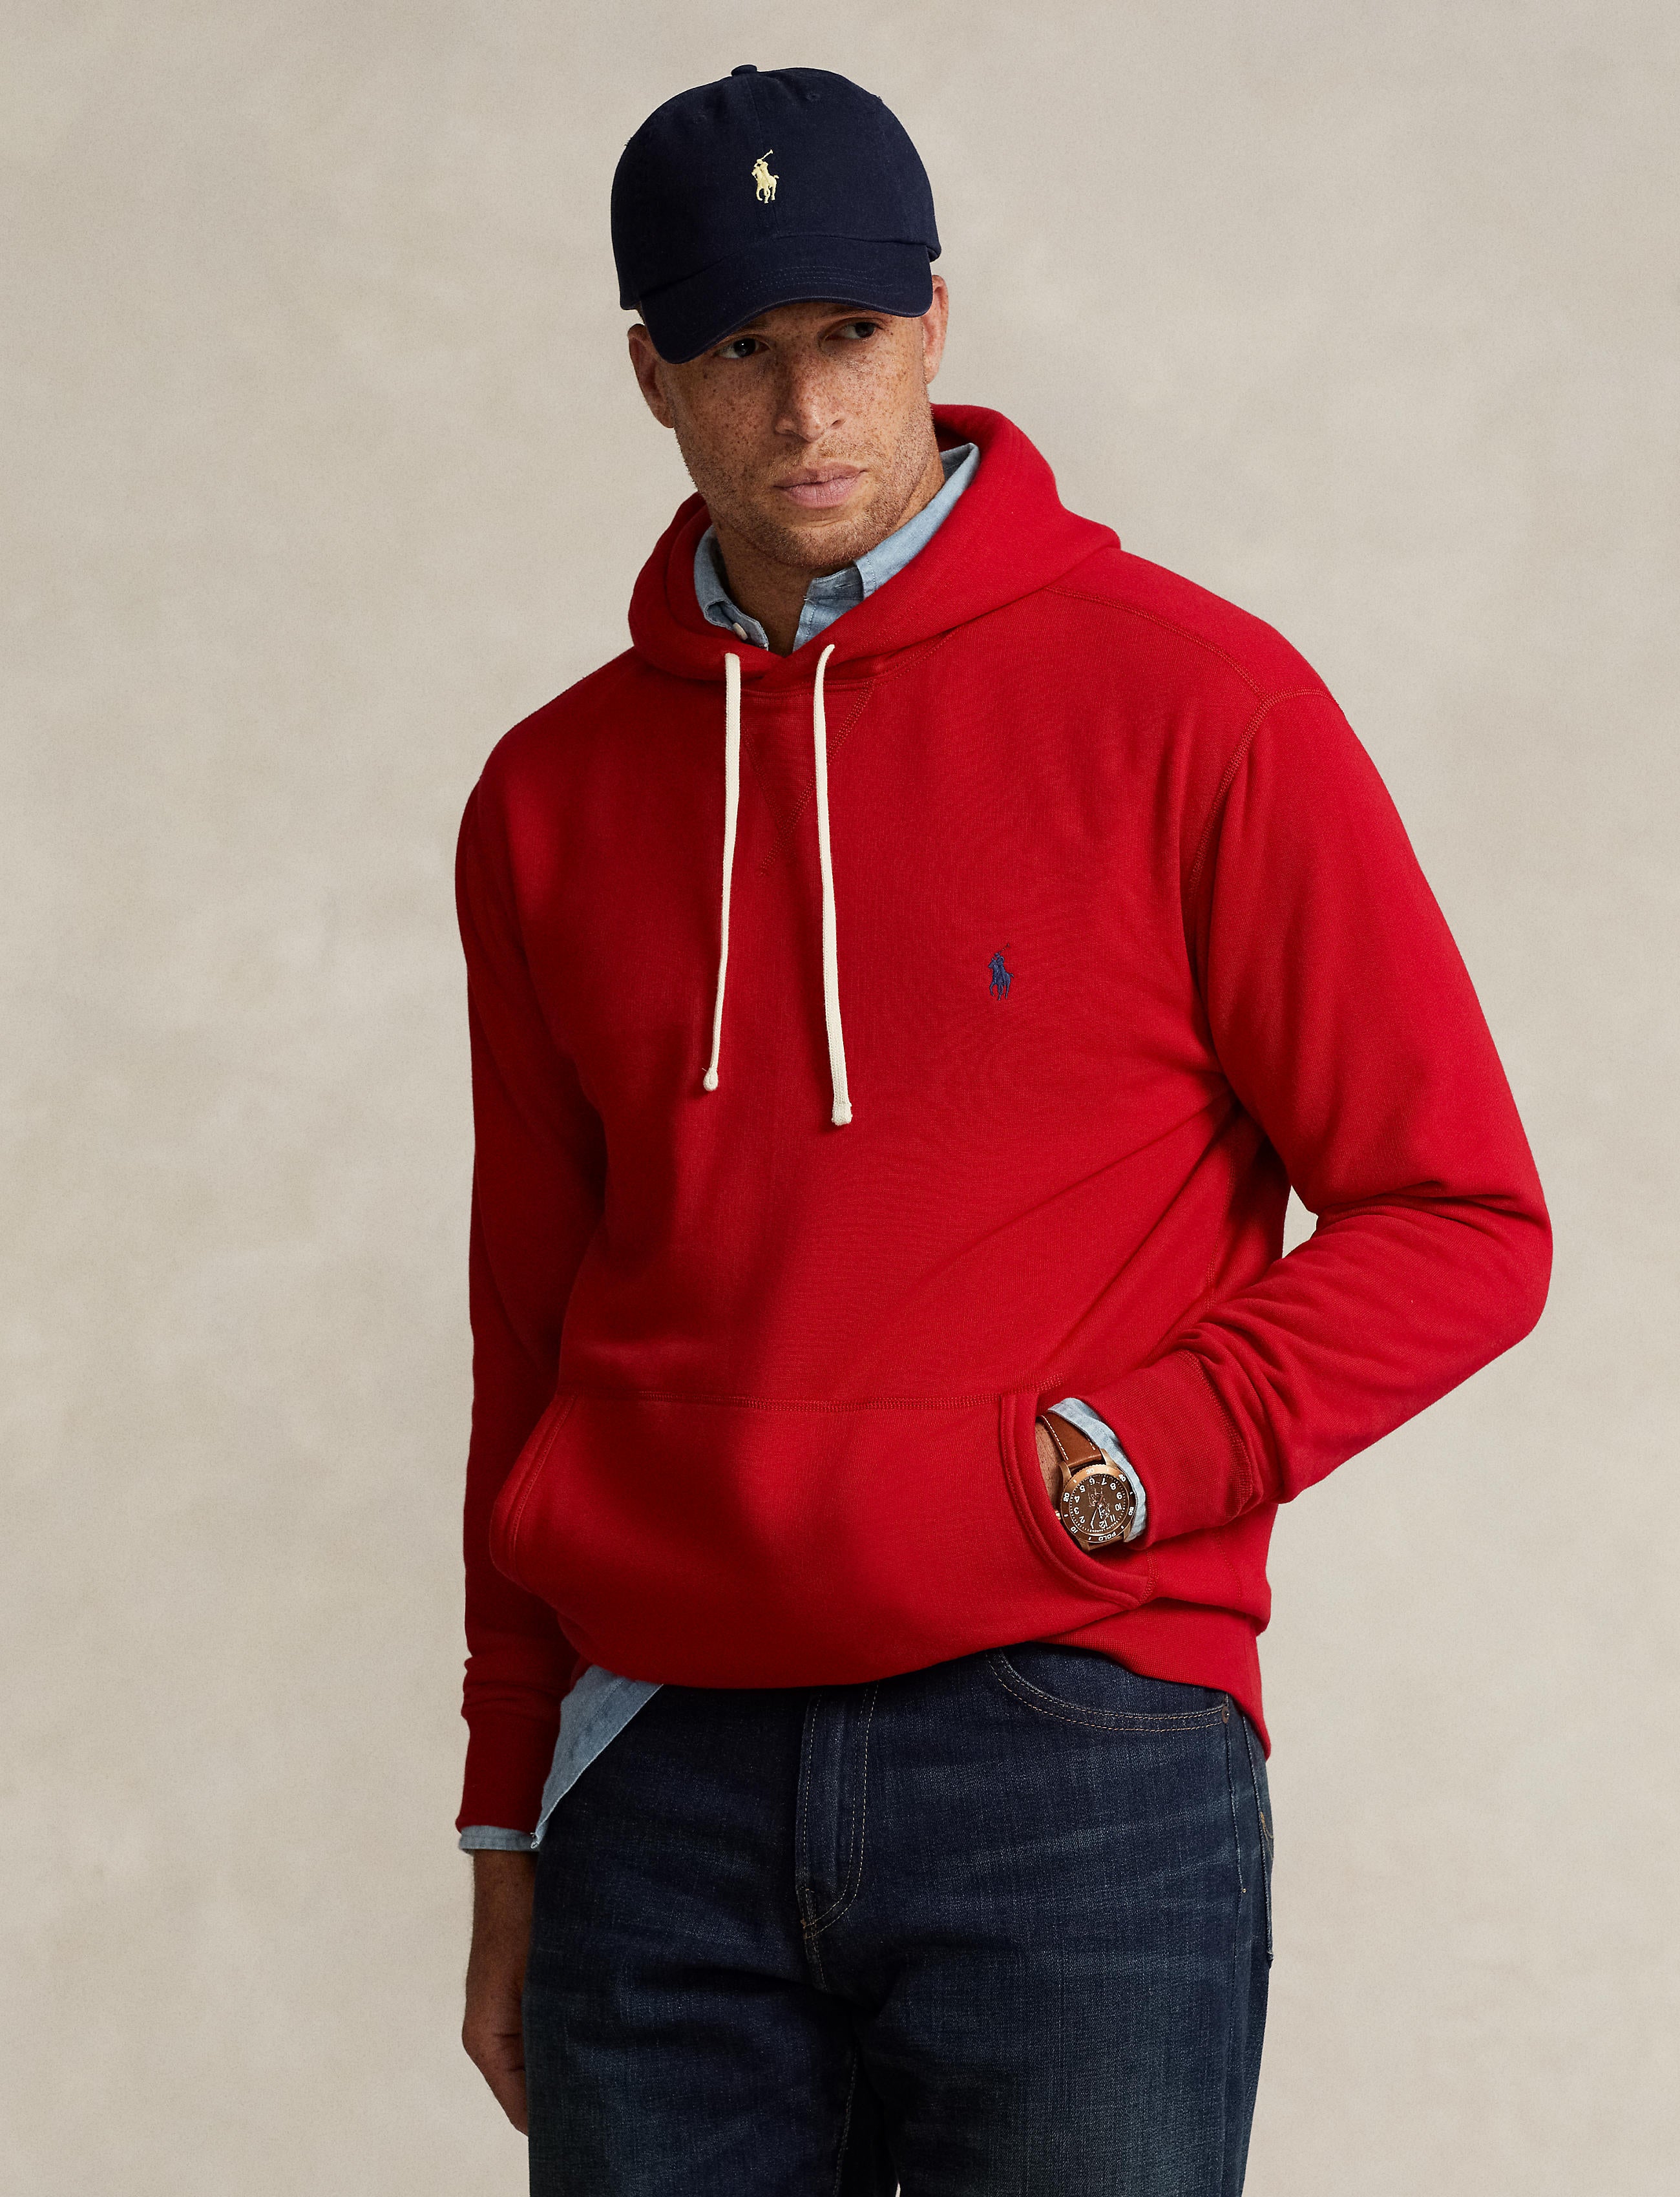 Polo Ralph Lauren Big & Tall Hoodie - Fleece Knit - Red – InStyle